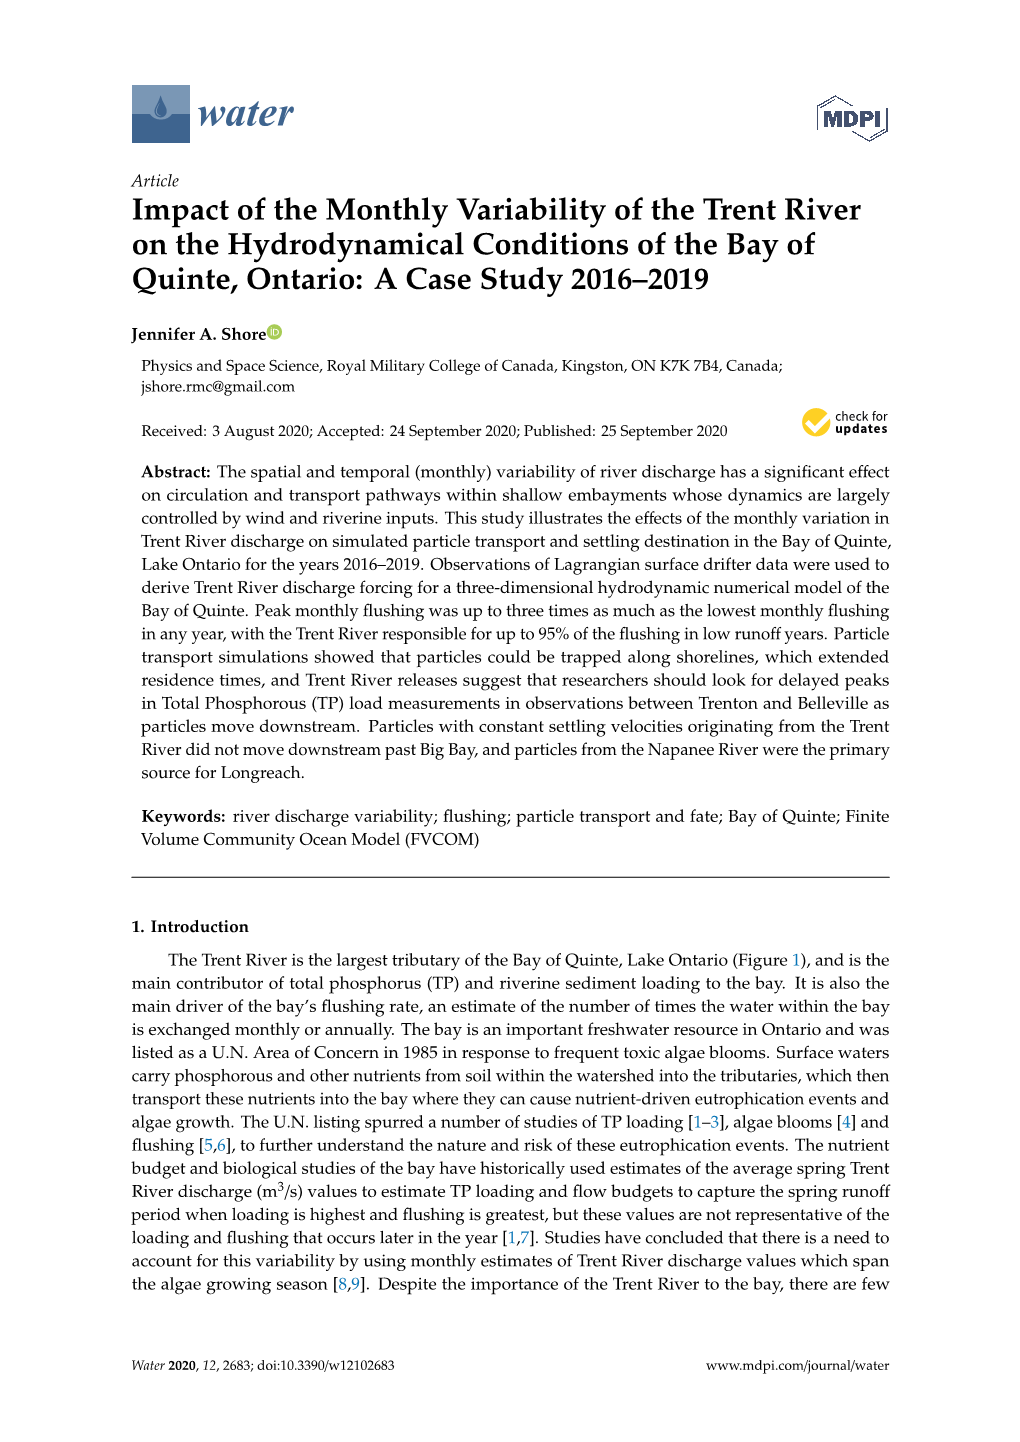 Impact of the Monthly Variability of the Trent River on the Hydrodynamical Conditions of the Bay of Quinte, Ontario: a Case Study 2016–2019